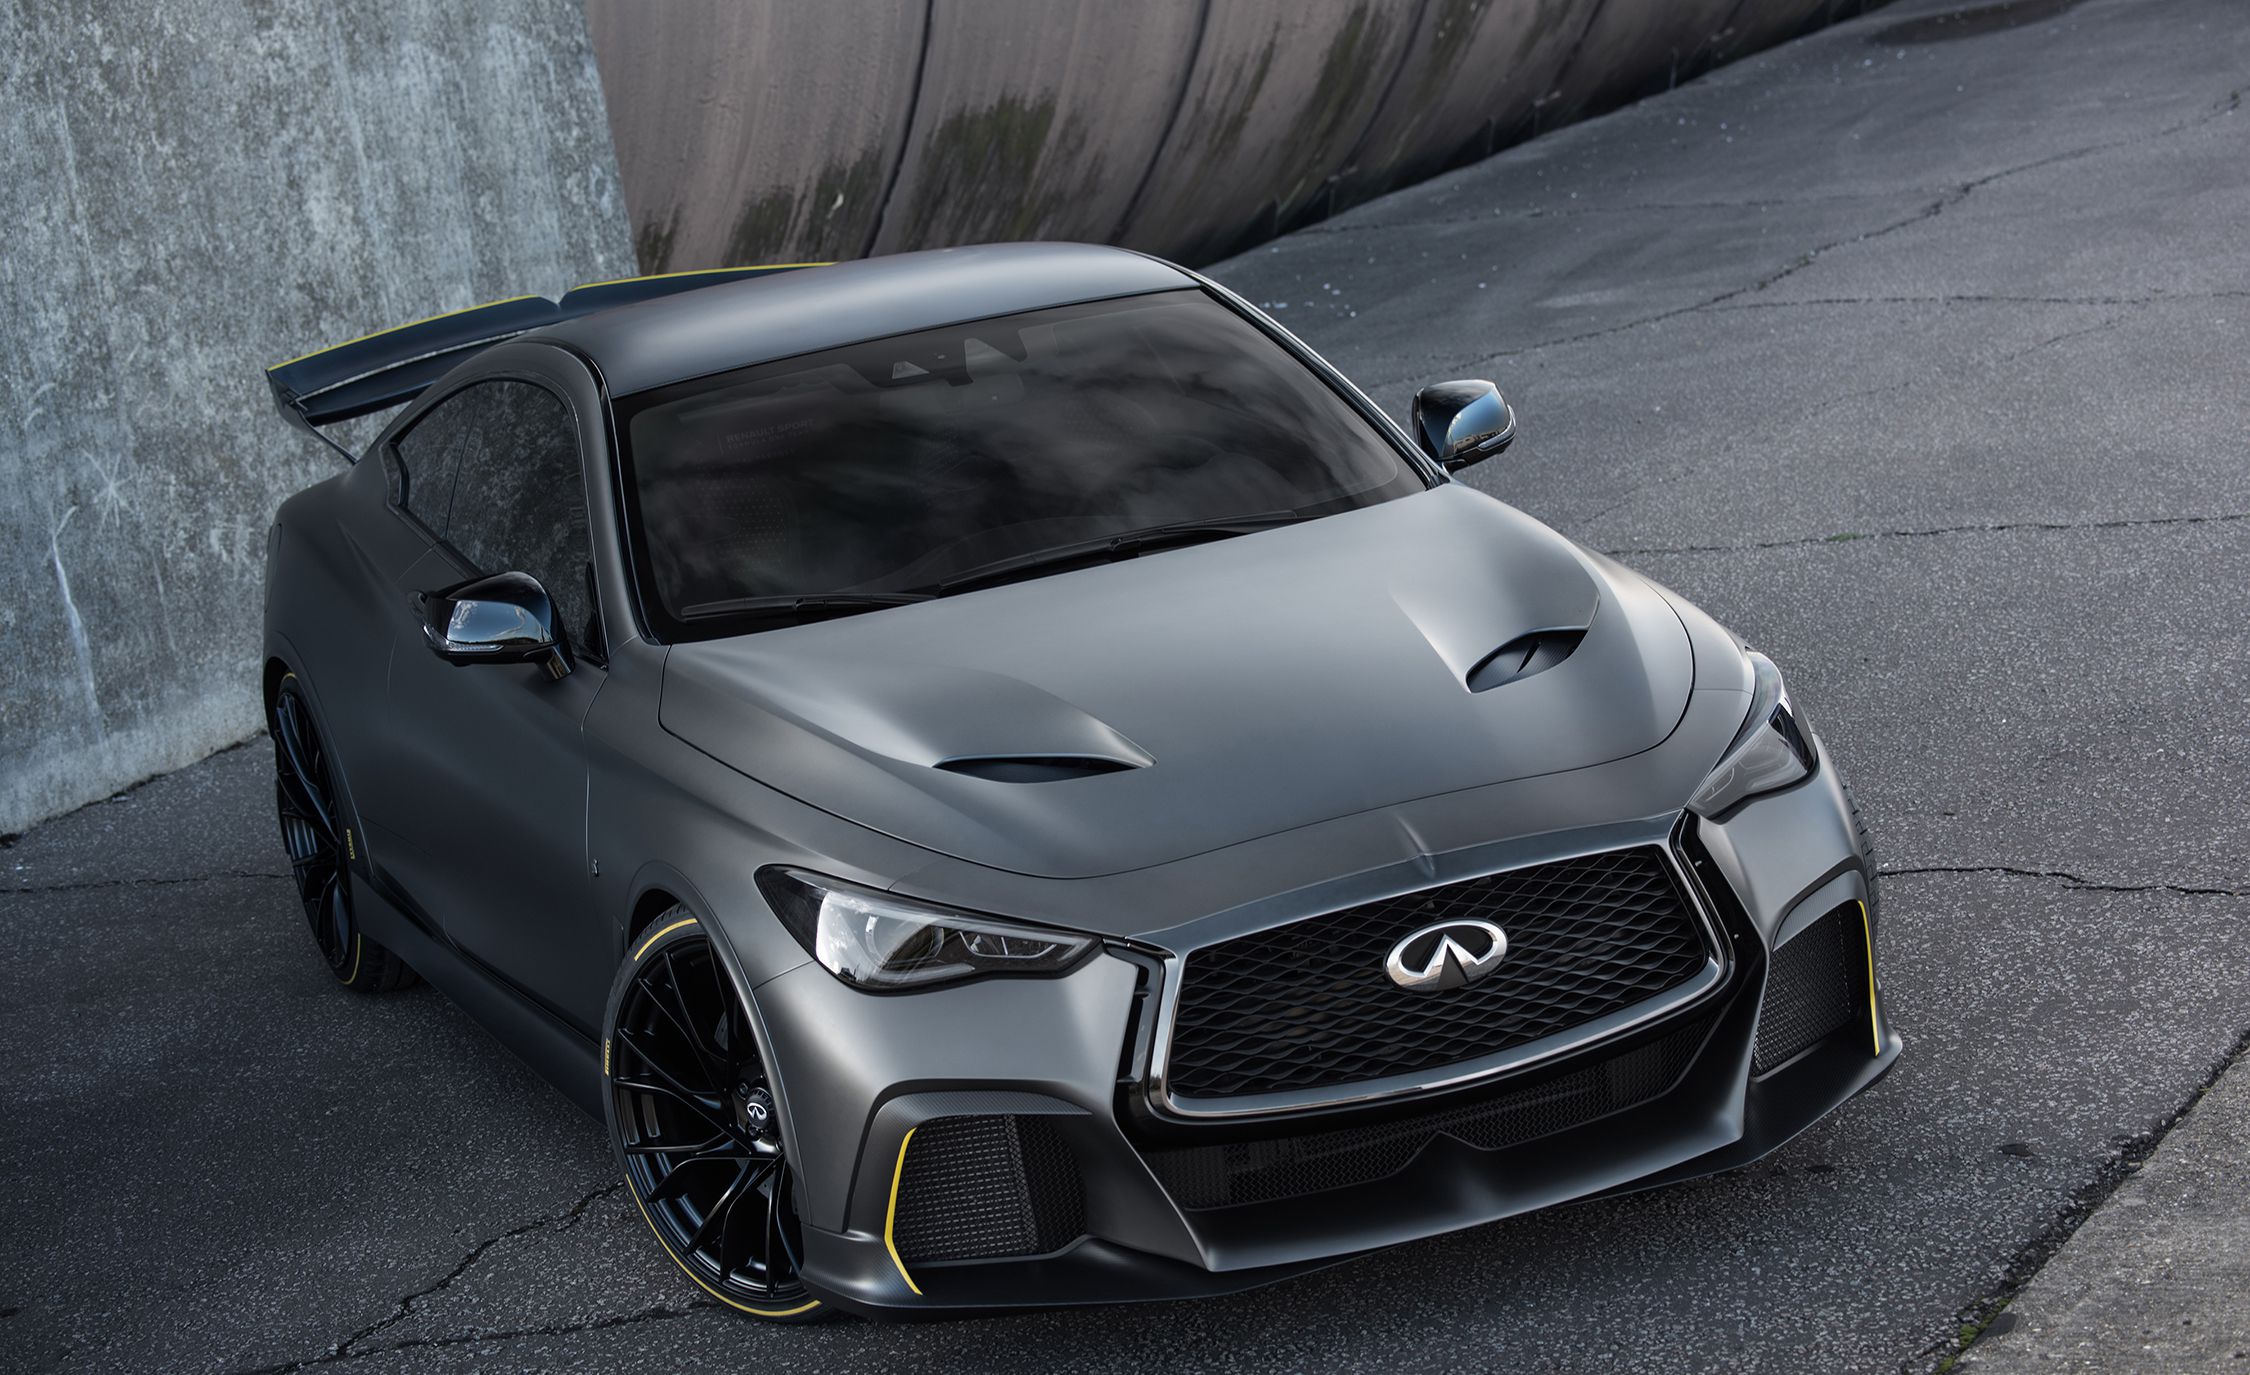 Is the Project Black S Prototype the Infiniti We've Been Waiting For?